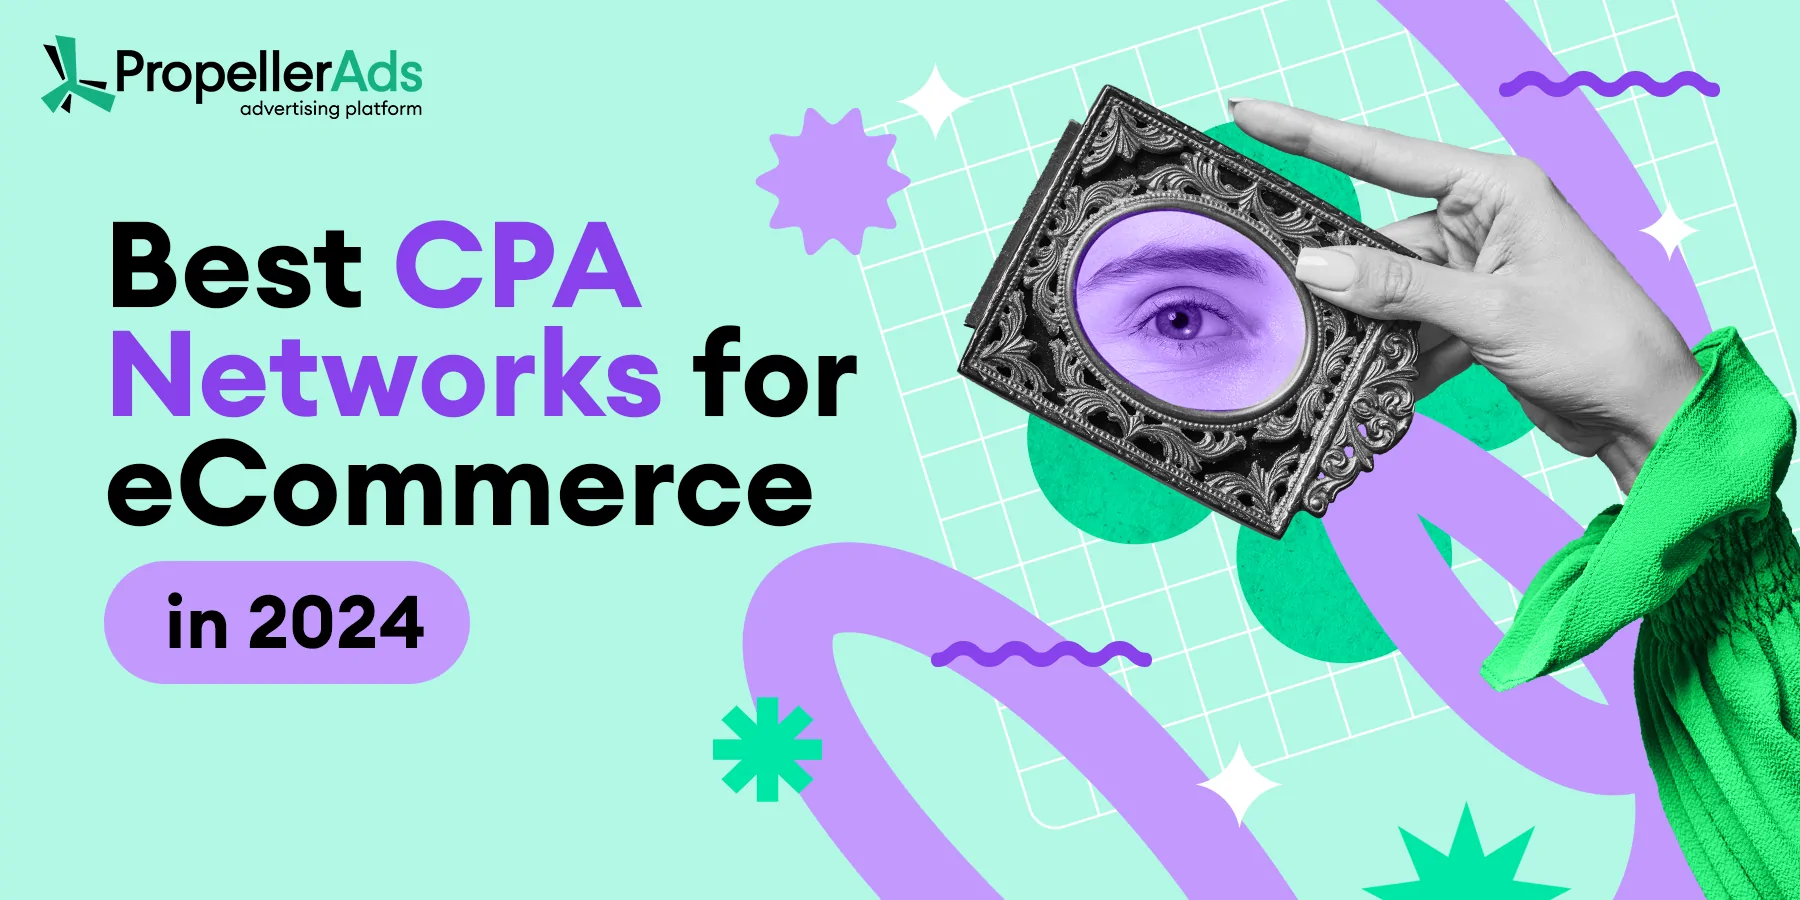 Propellerads-best-ecommerce-cpa-networks-banner